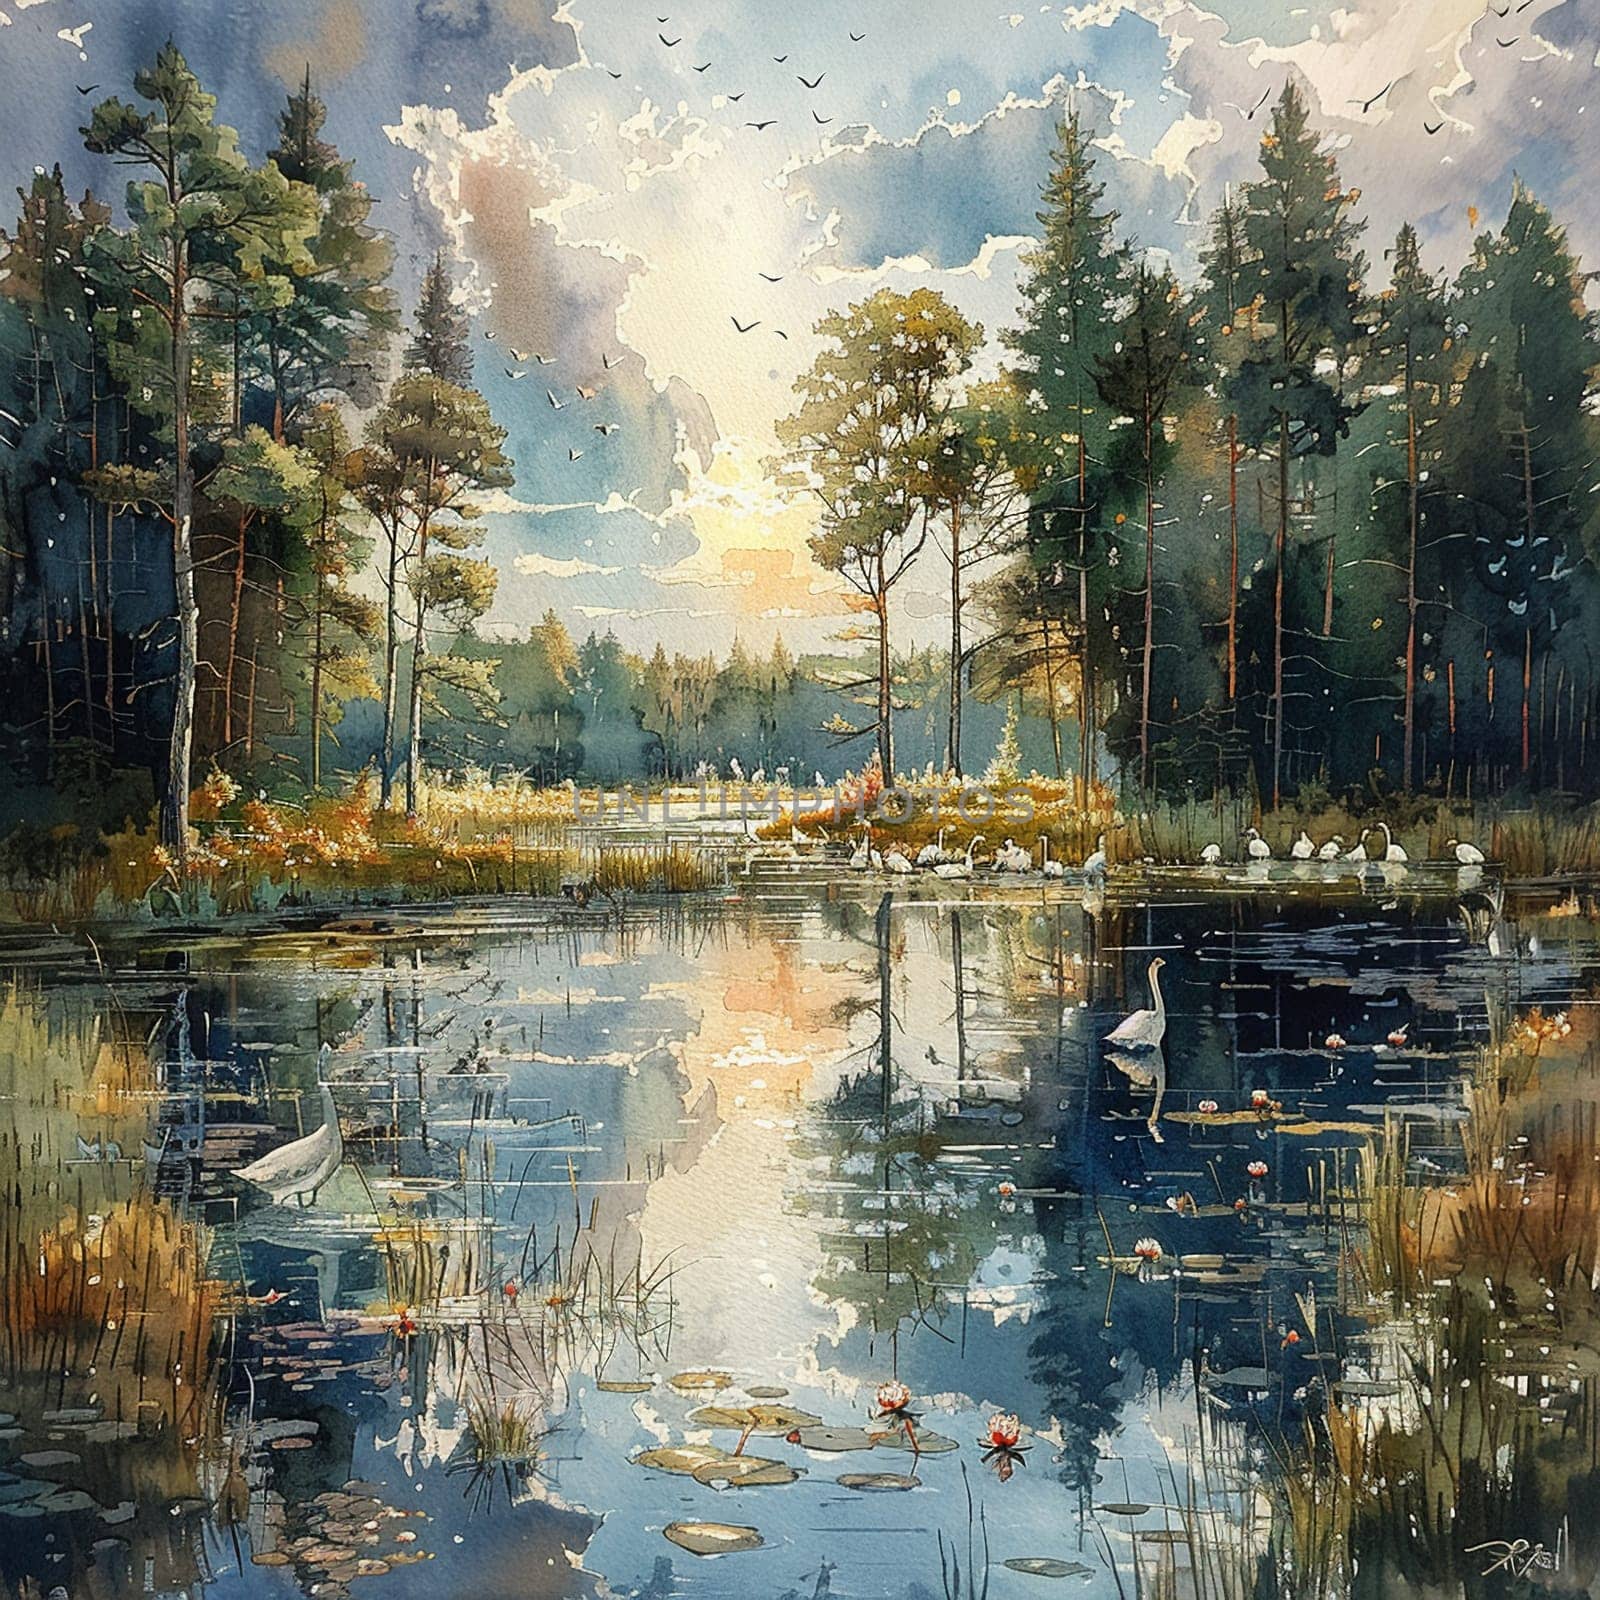 Watercolor painting of serene pond with wildlife gathering to drink, symbolizing World Wildlife Day.